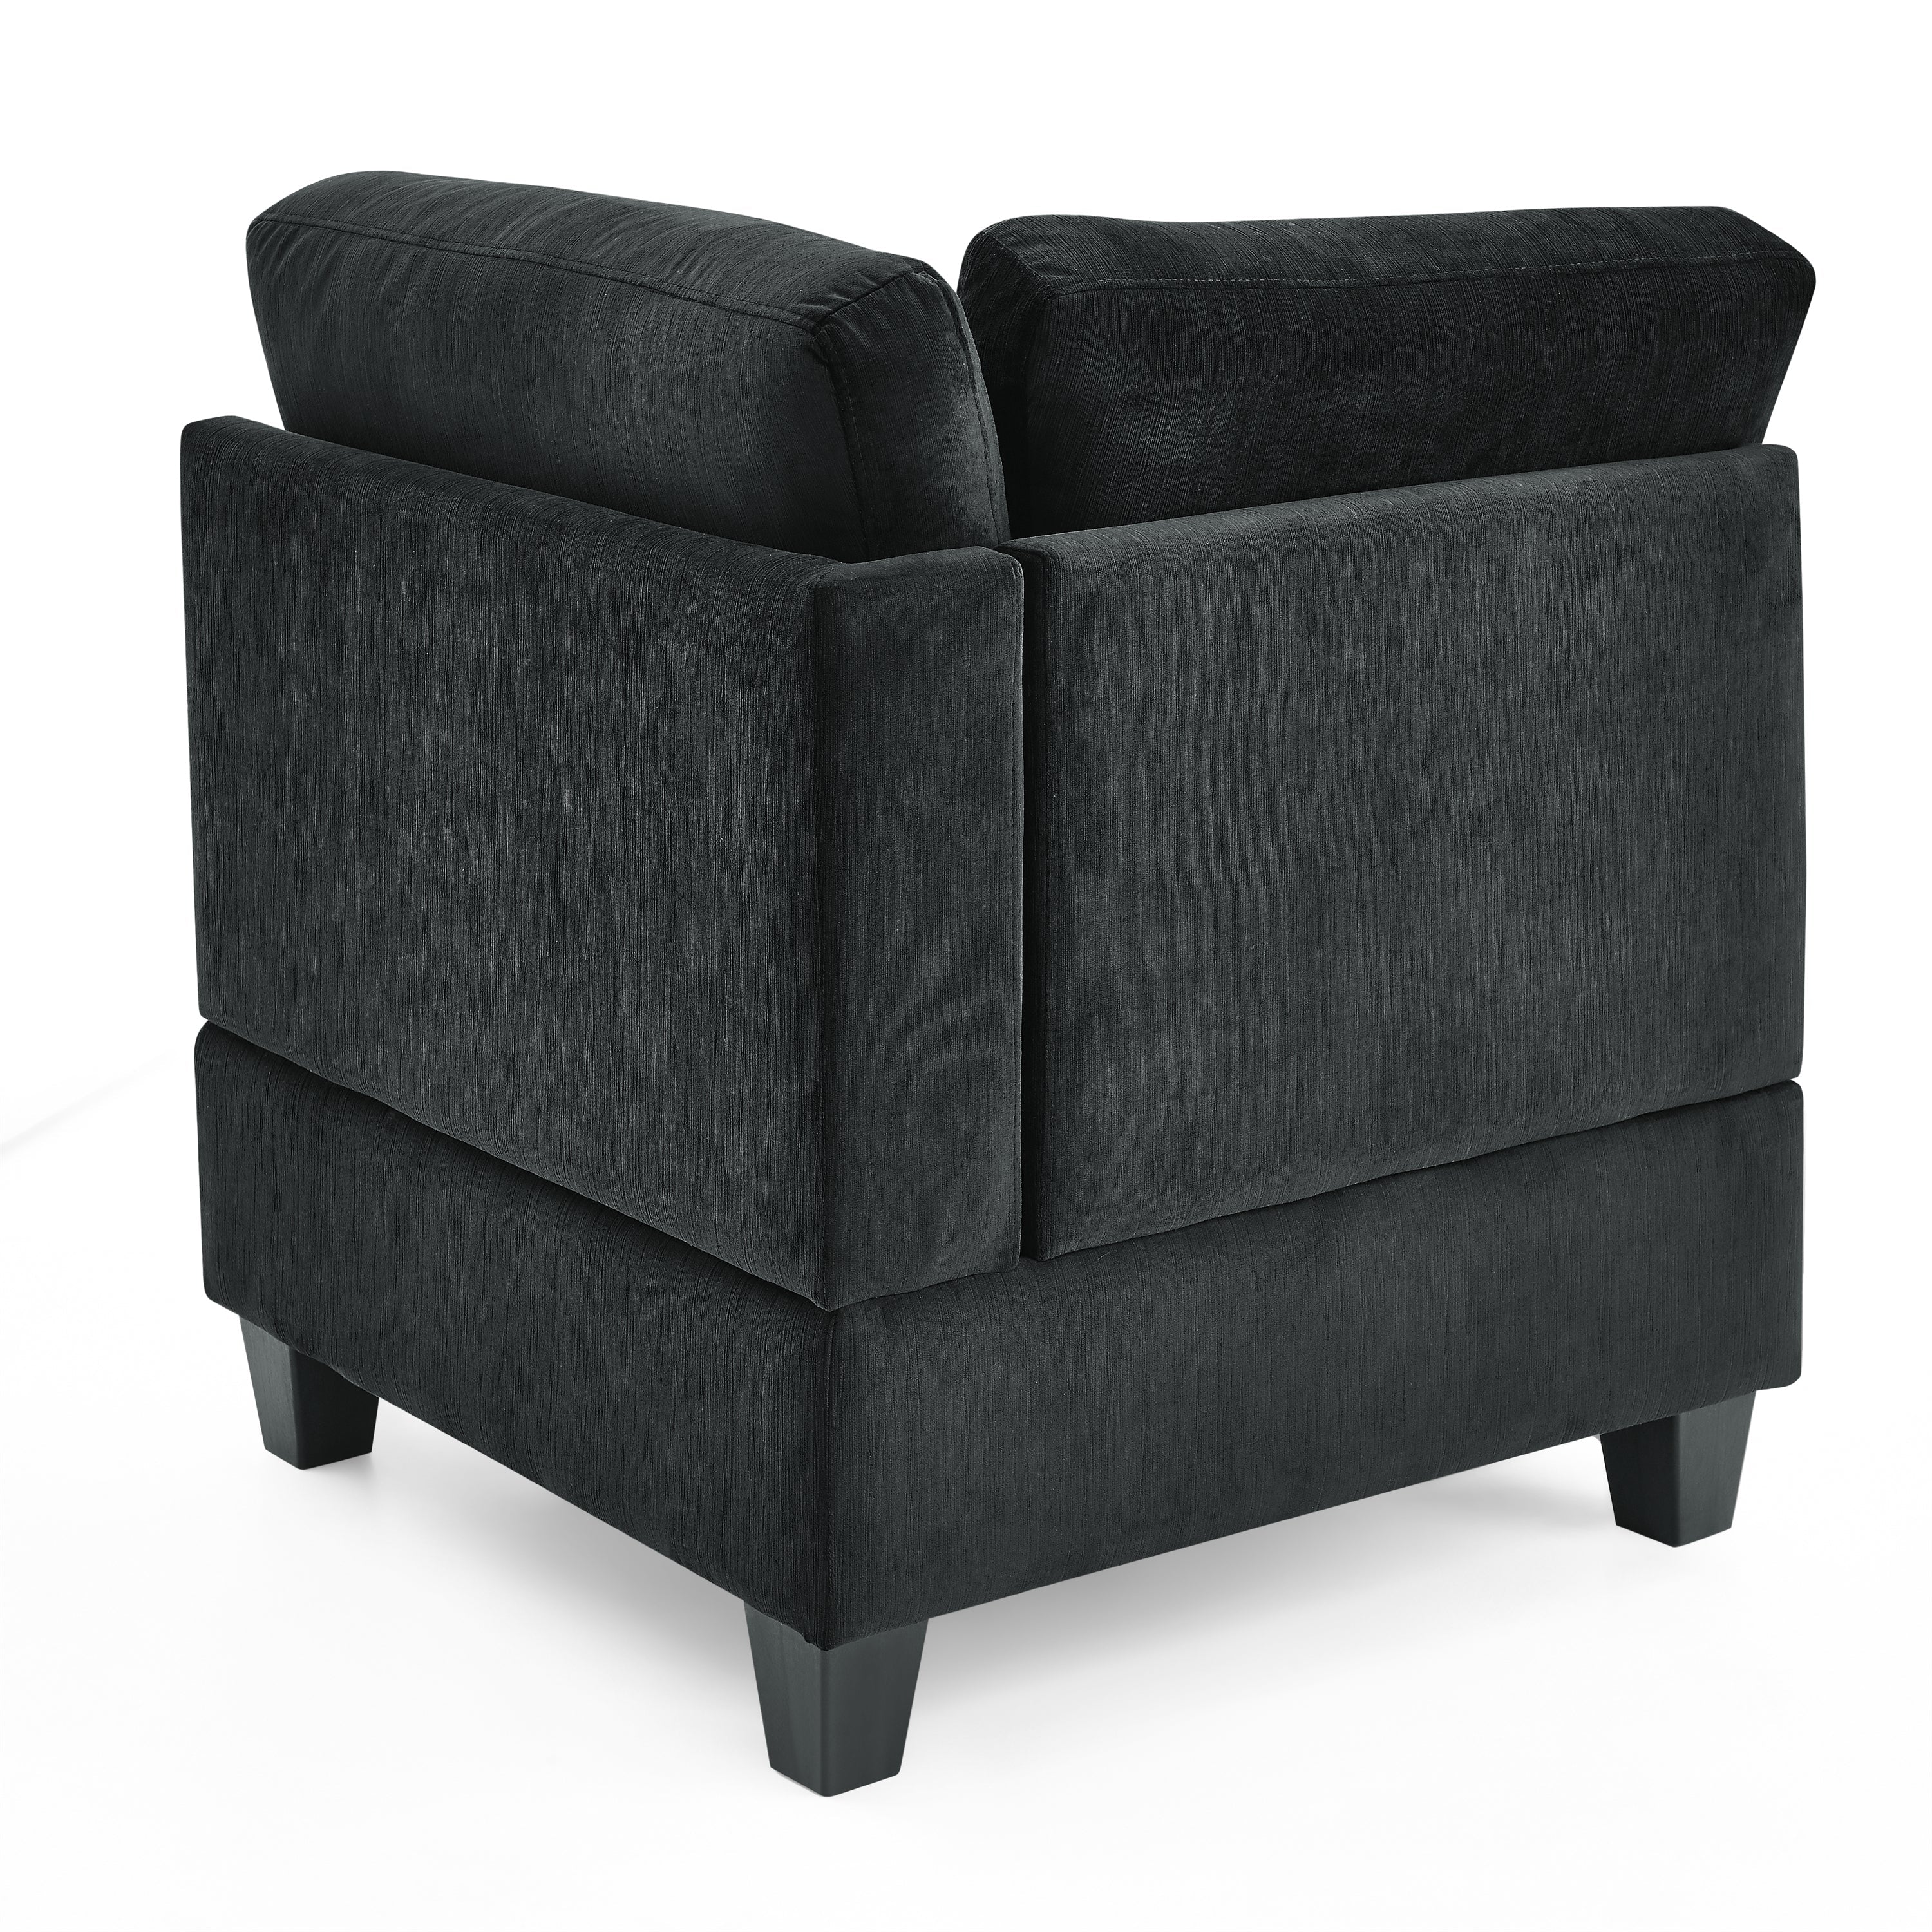 Black Velvet Modular Sectional Sofa – Customizable Comfort with Storage-Stationary Sectionals-American Furniture Outlet